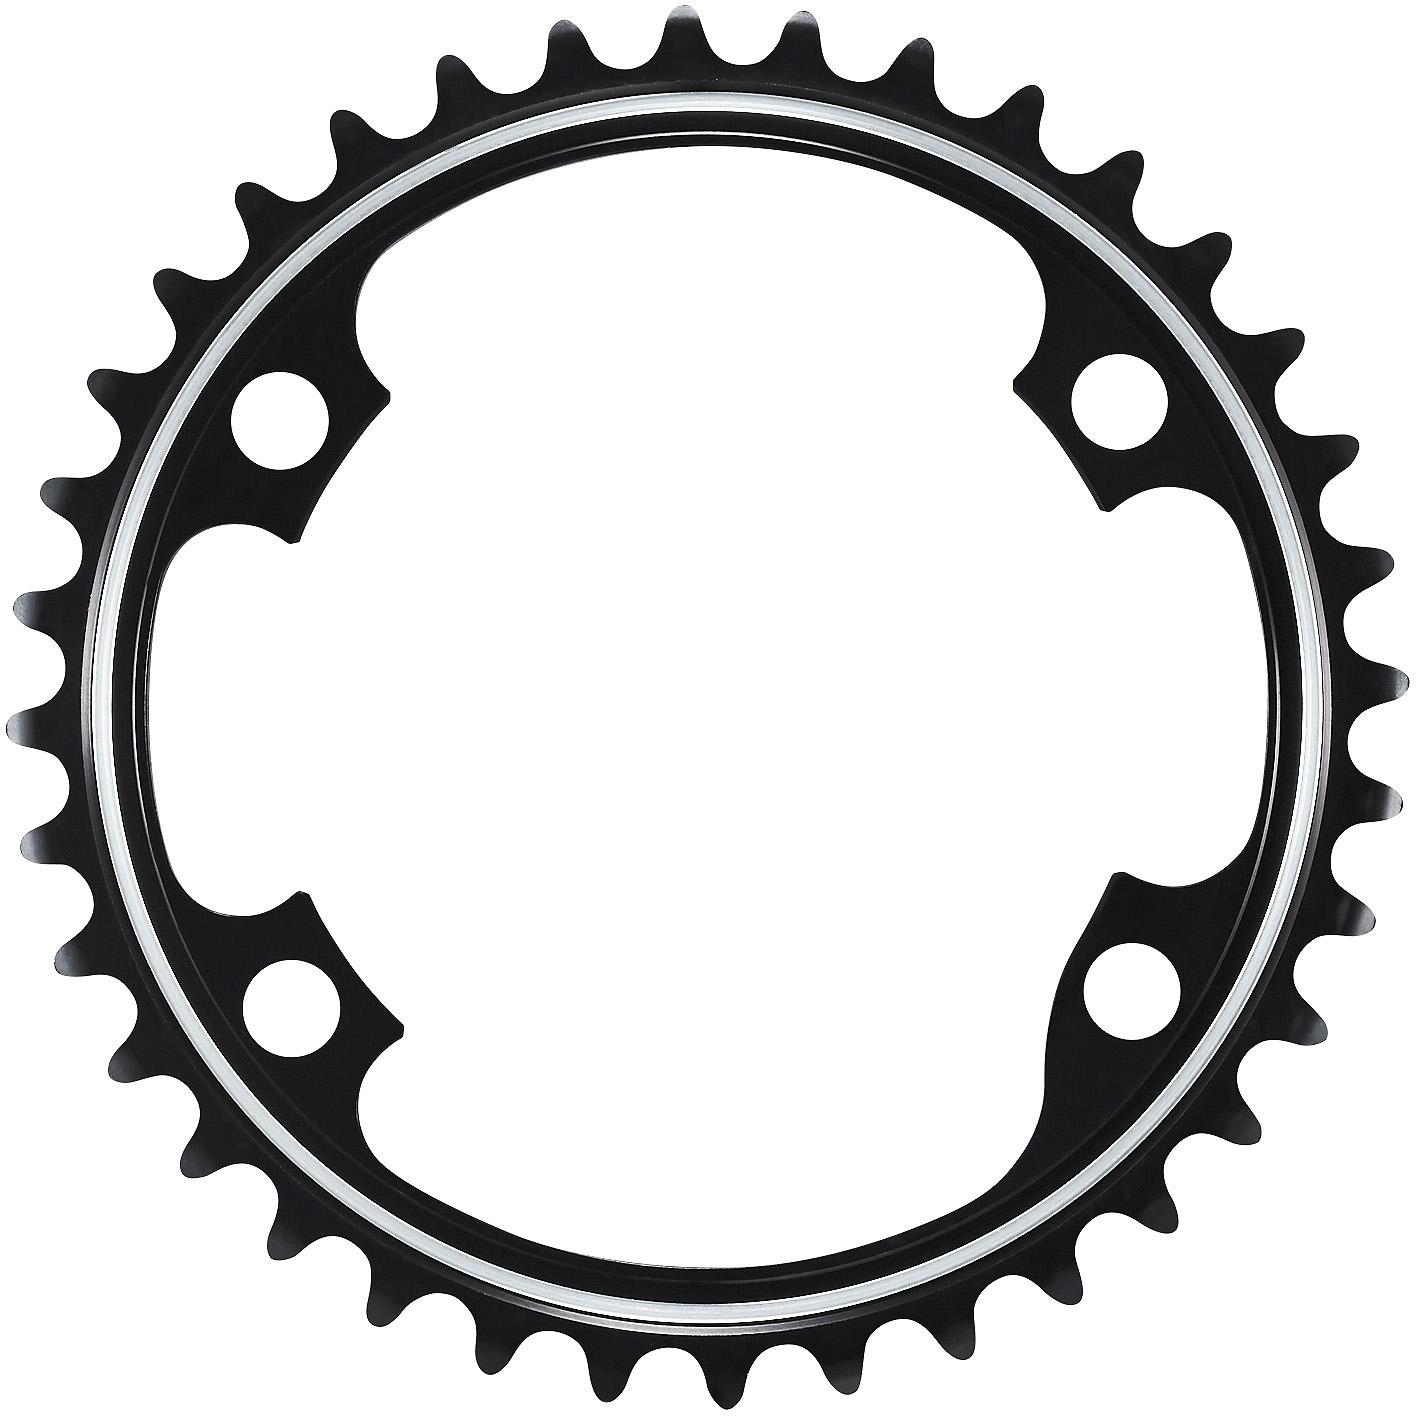 Fc-R9100 Chainring 36T-Mt For 52-36T